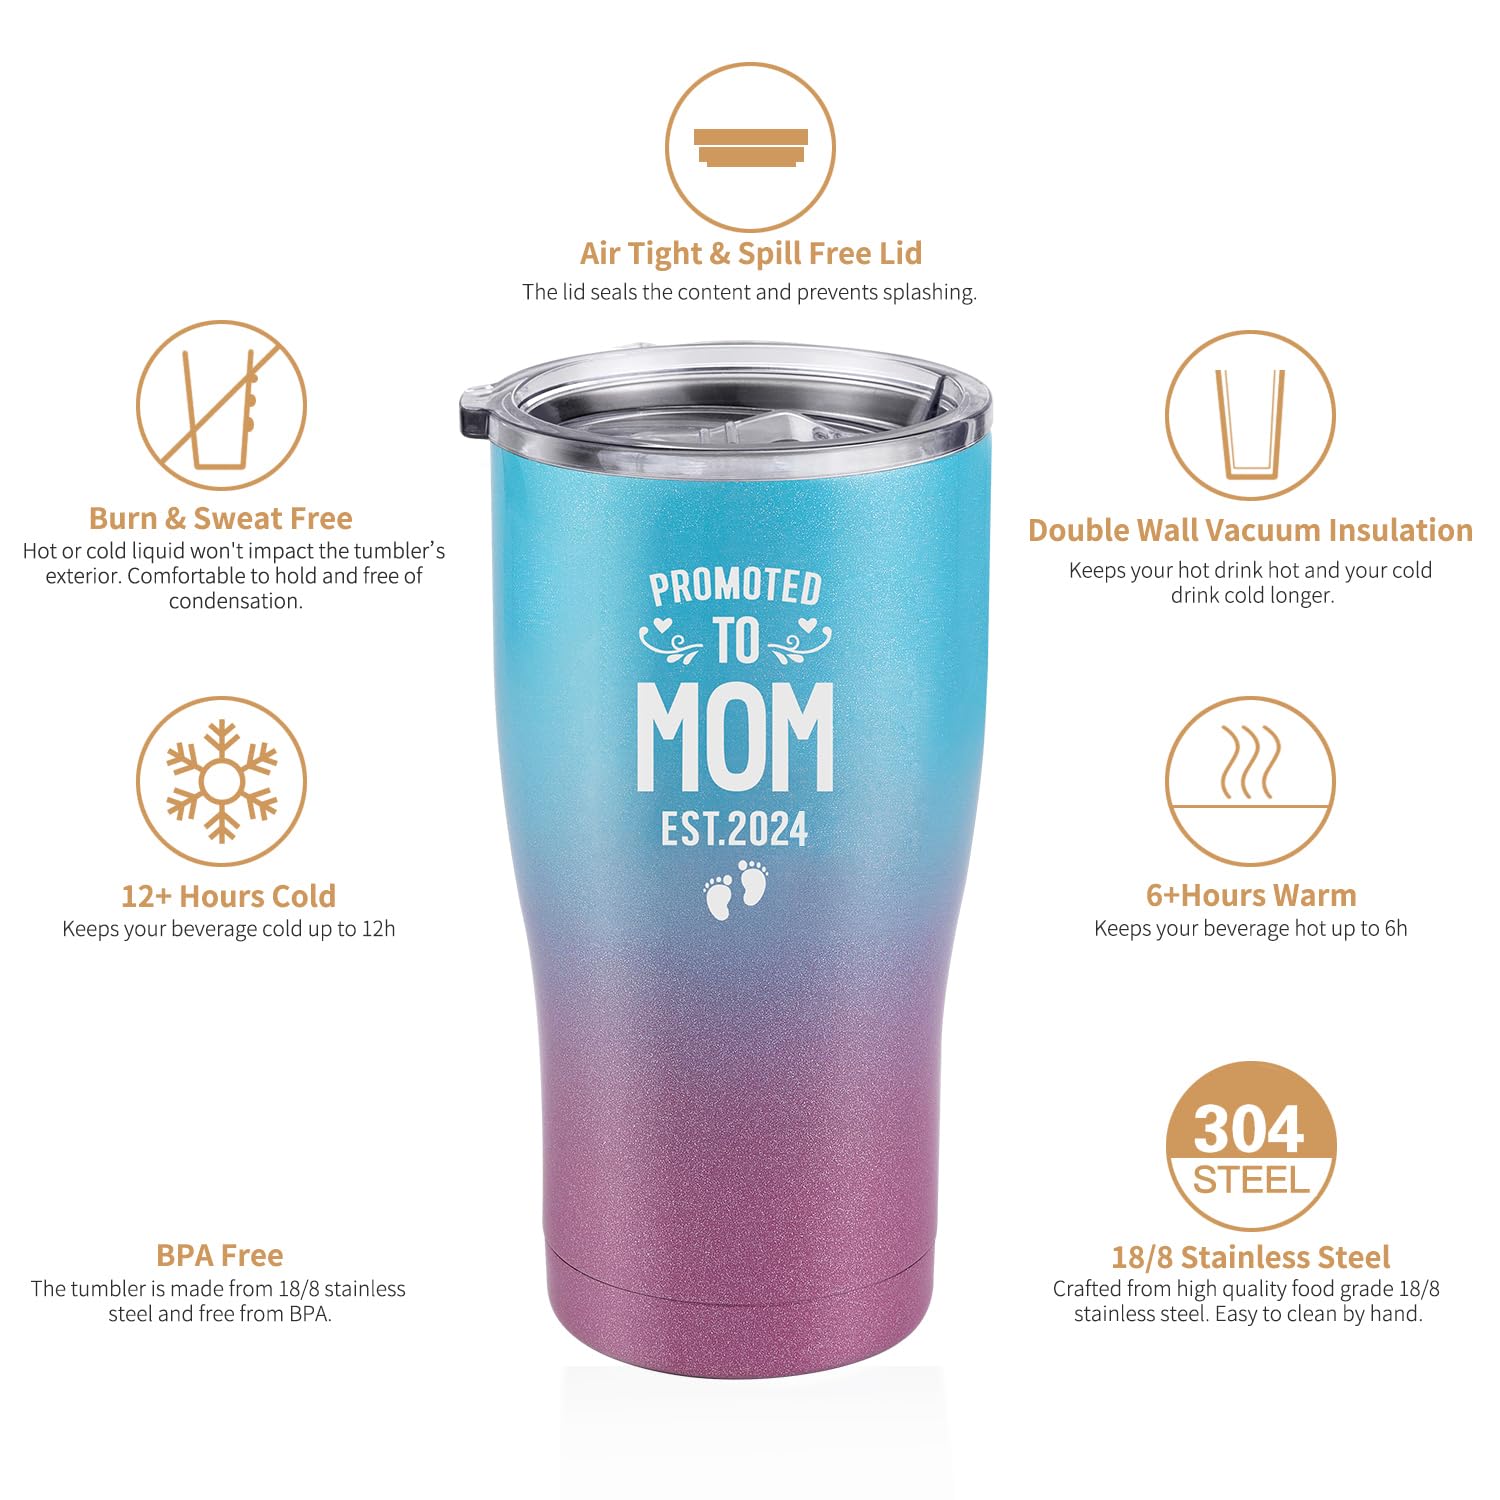 NUI LIVING Promoted to Mom Est 2024 Tumbler - New Mom Gifts Ideas - First Time Mom - Mom to be - Mommy w/New Baby Gift - Cute Expecting Mother to be Baby Shower Presents for Her (Purple Teal 2022)